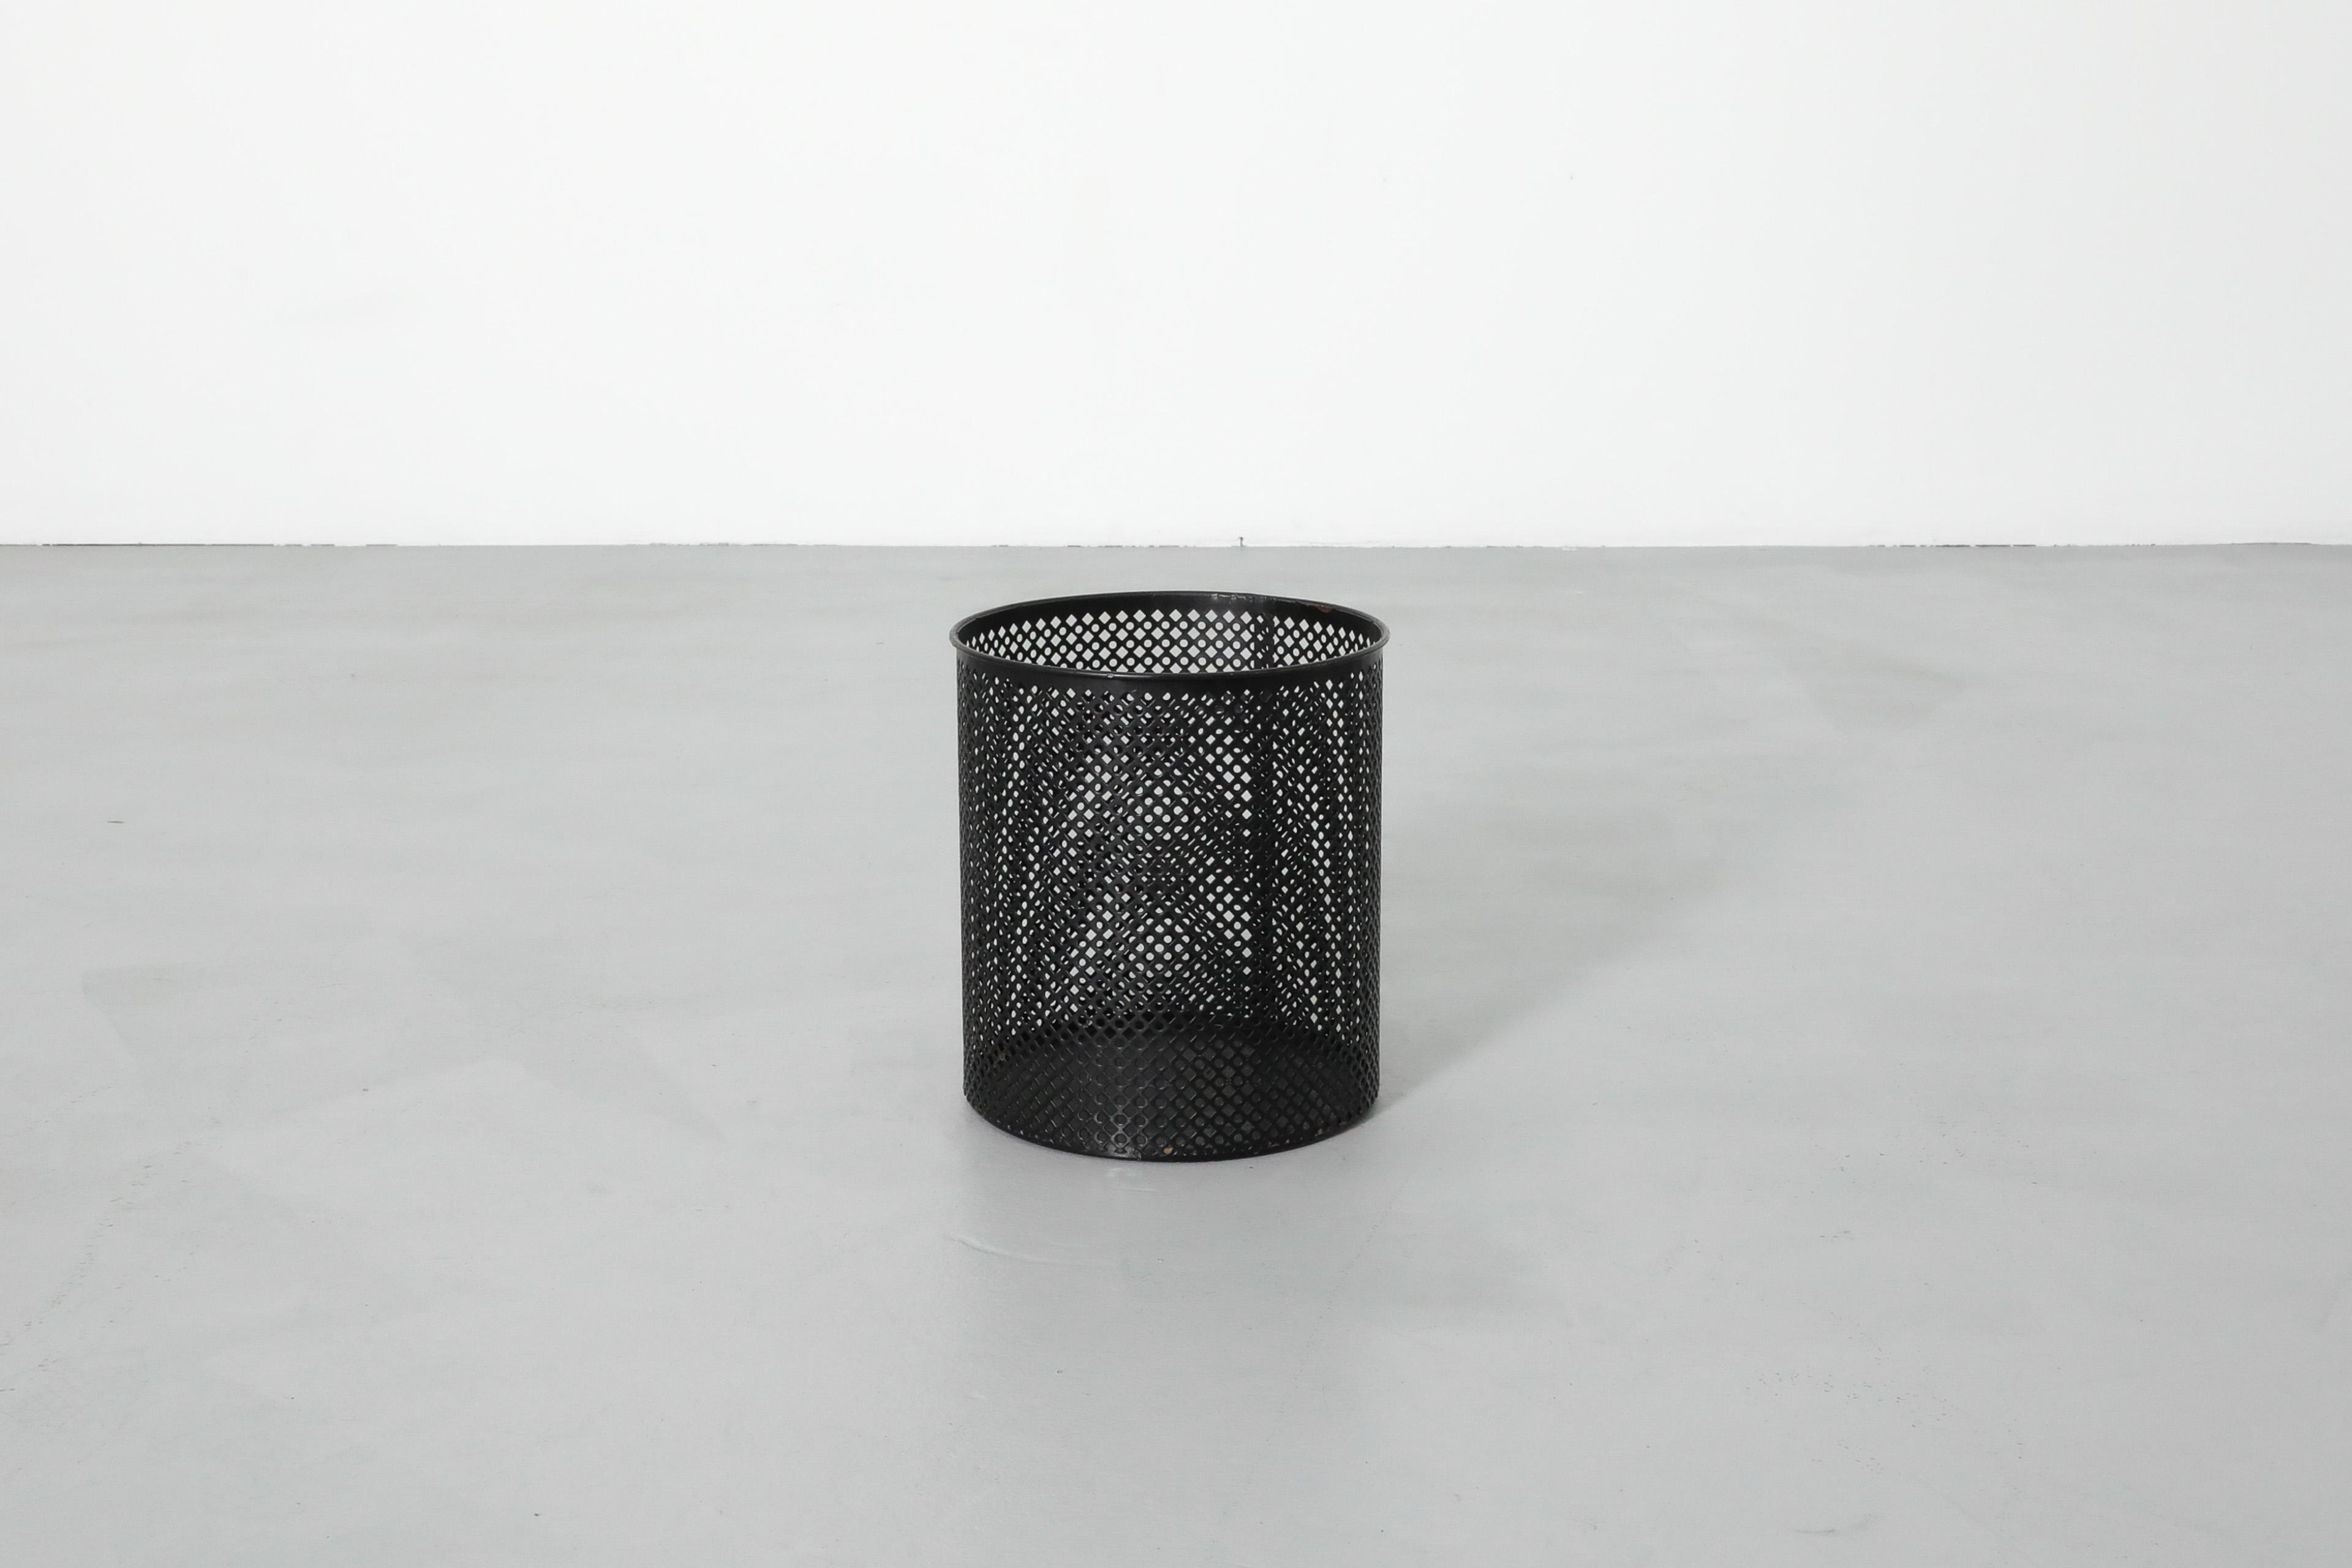 Mid-Century, Mathieu Mategot attributed round perforated black enameled metal wastebasket. Modern styled minimalist basket with diamond shaped perforation in original condition with some visible wear and enamel loss consistent with its age and use. 